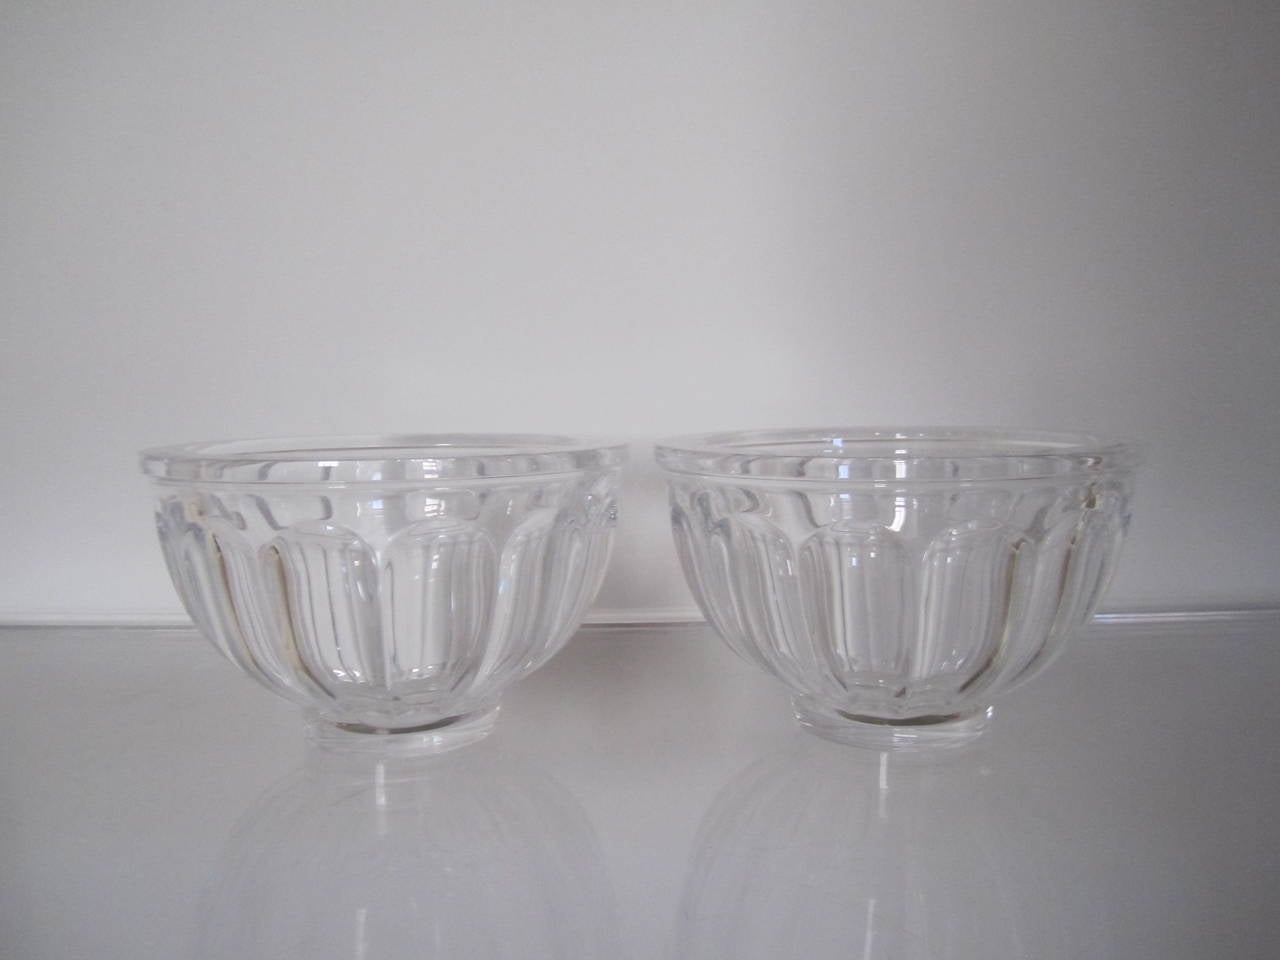 20th Century Pair of Vintage Scandinavian Signed Crystal Bowls by Orrefors, Sweden